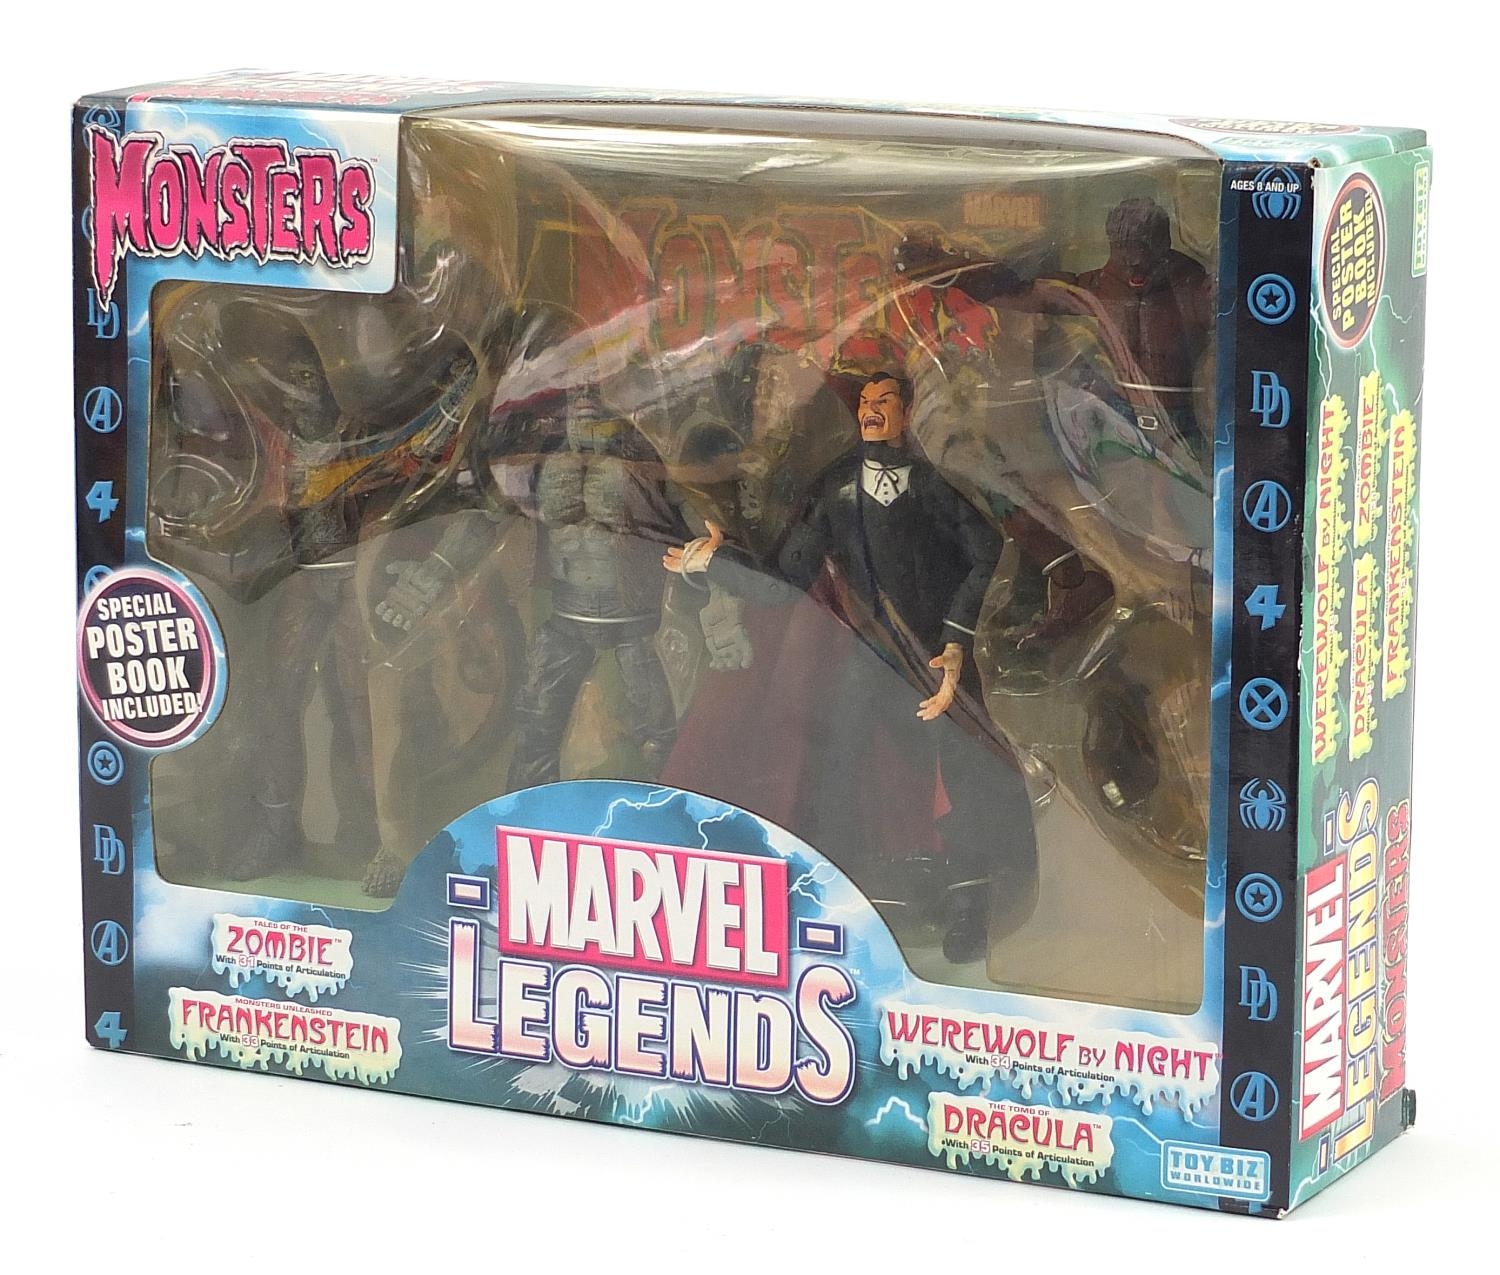 Marvel Legends Monsters action figure set by Toy Biz with box